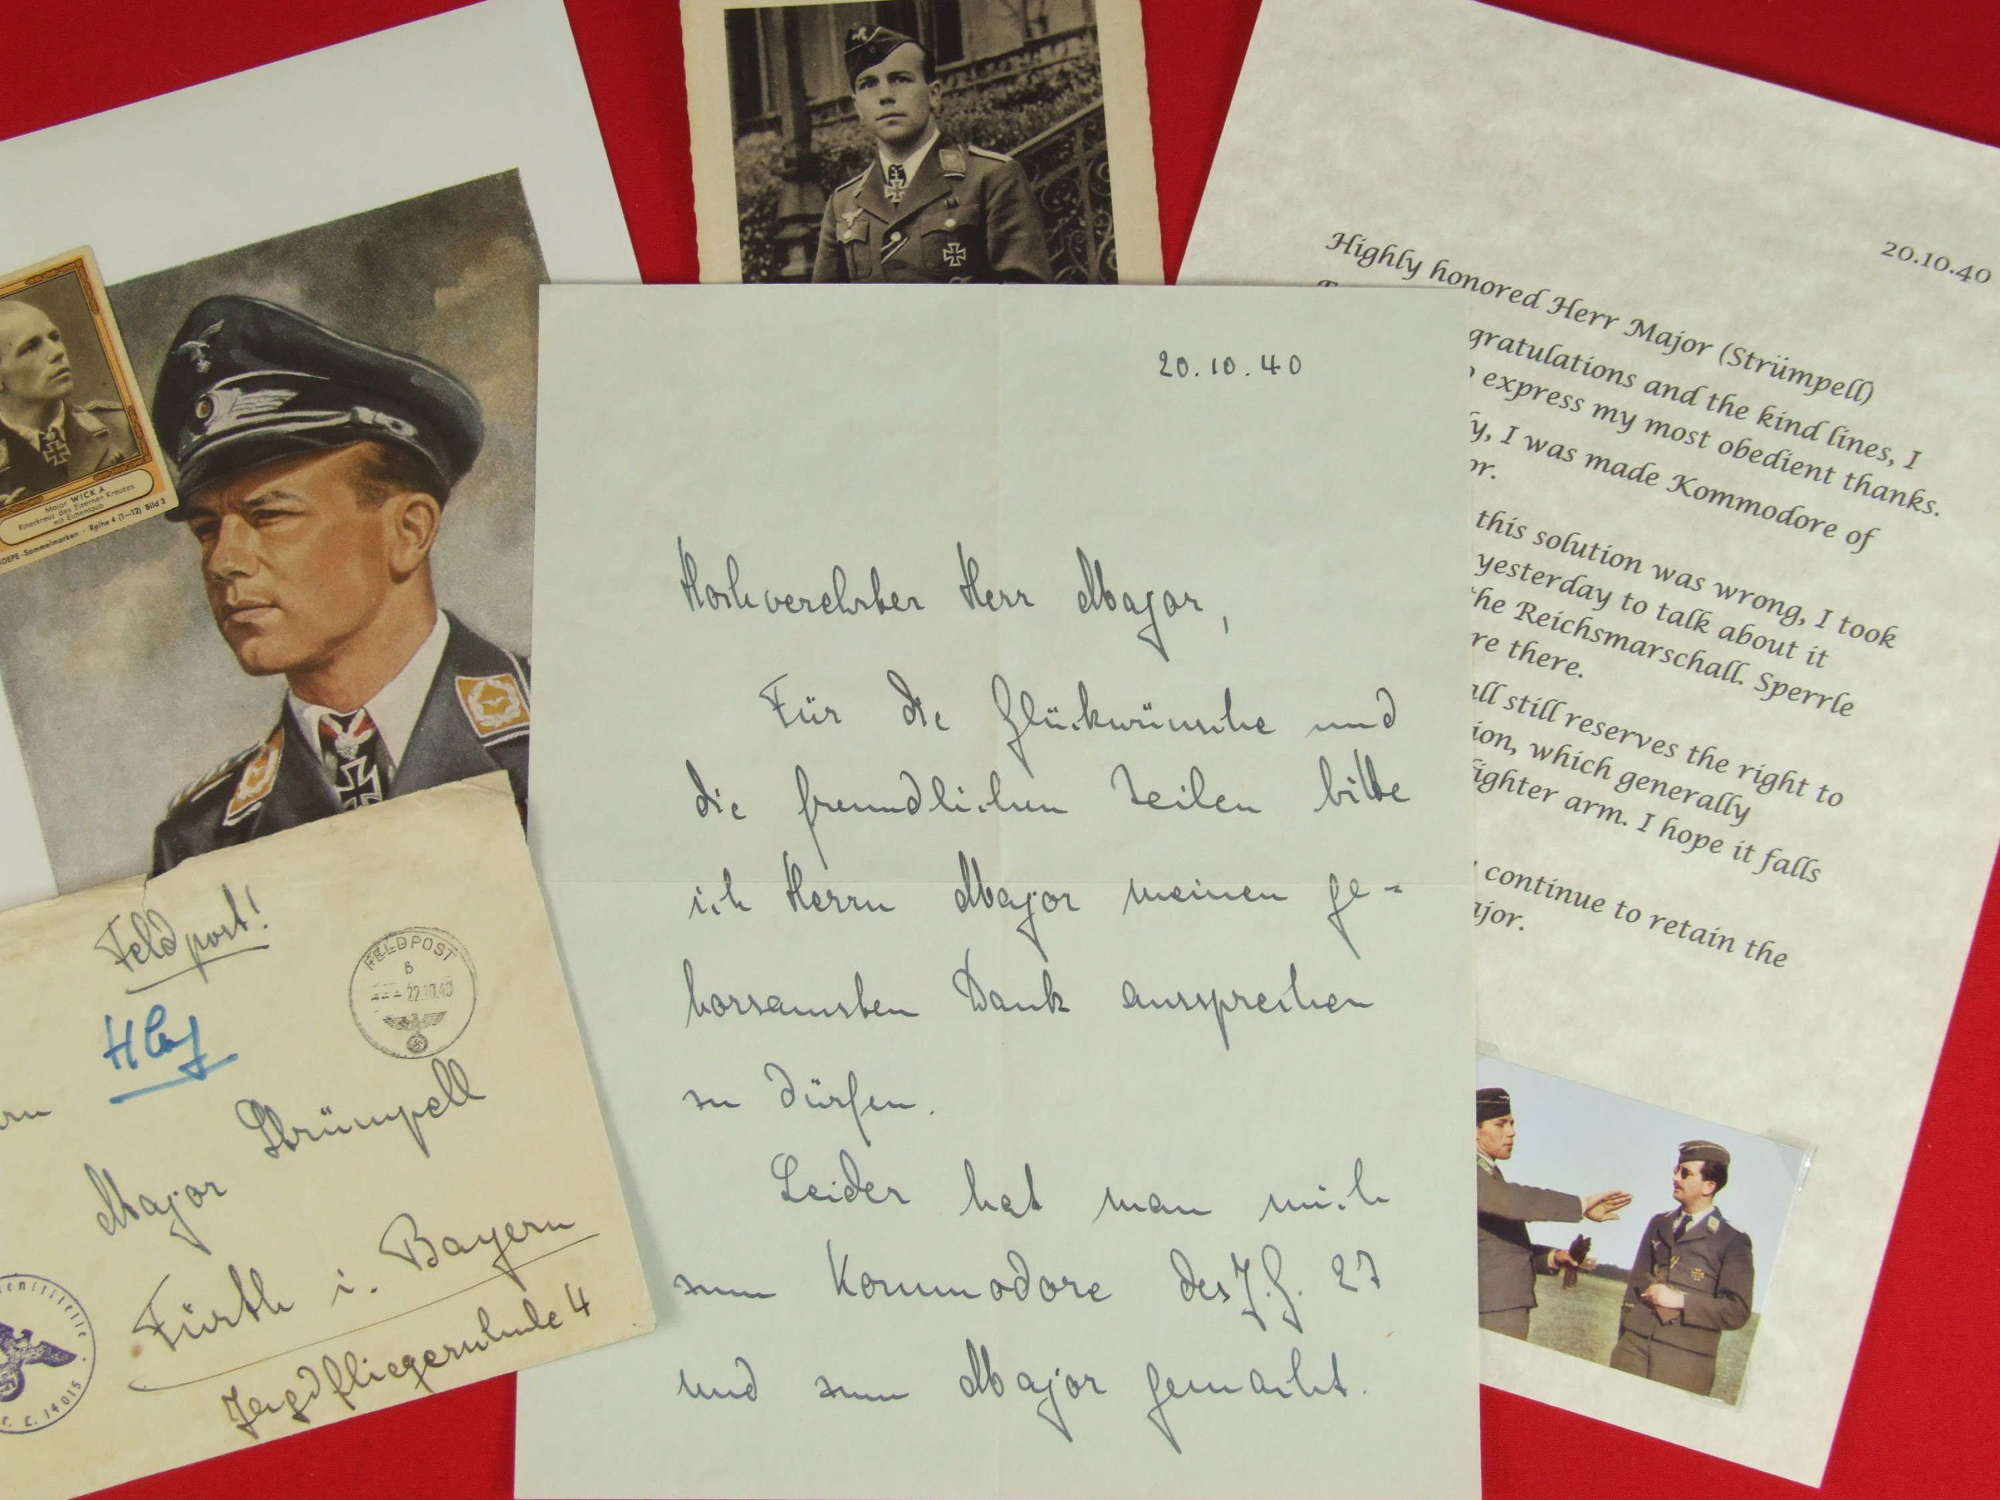 Hand Written Letter and Signature. Battle of Britain Ace Helmut Wick